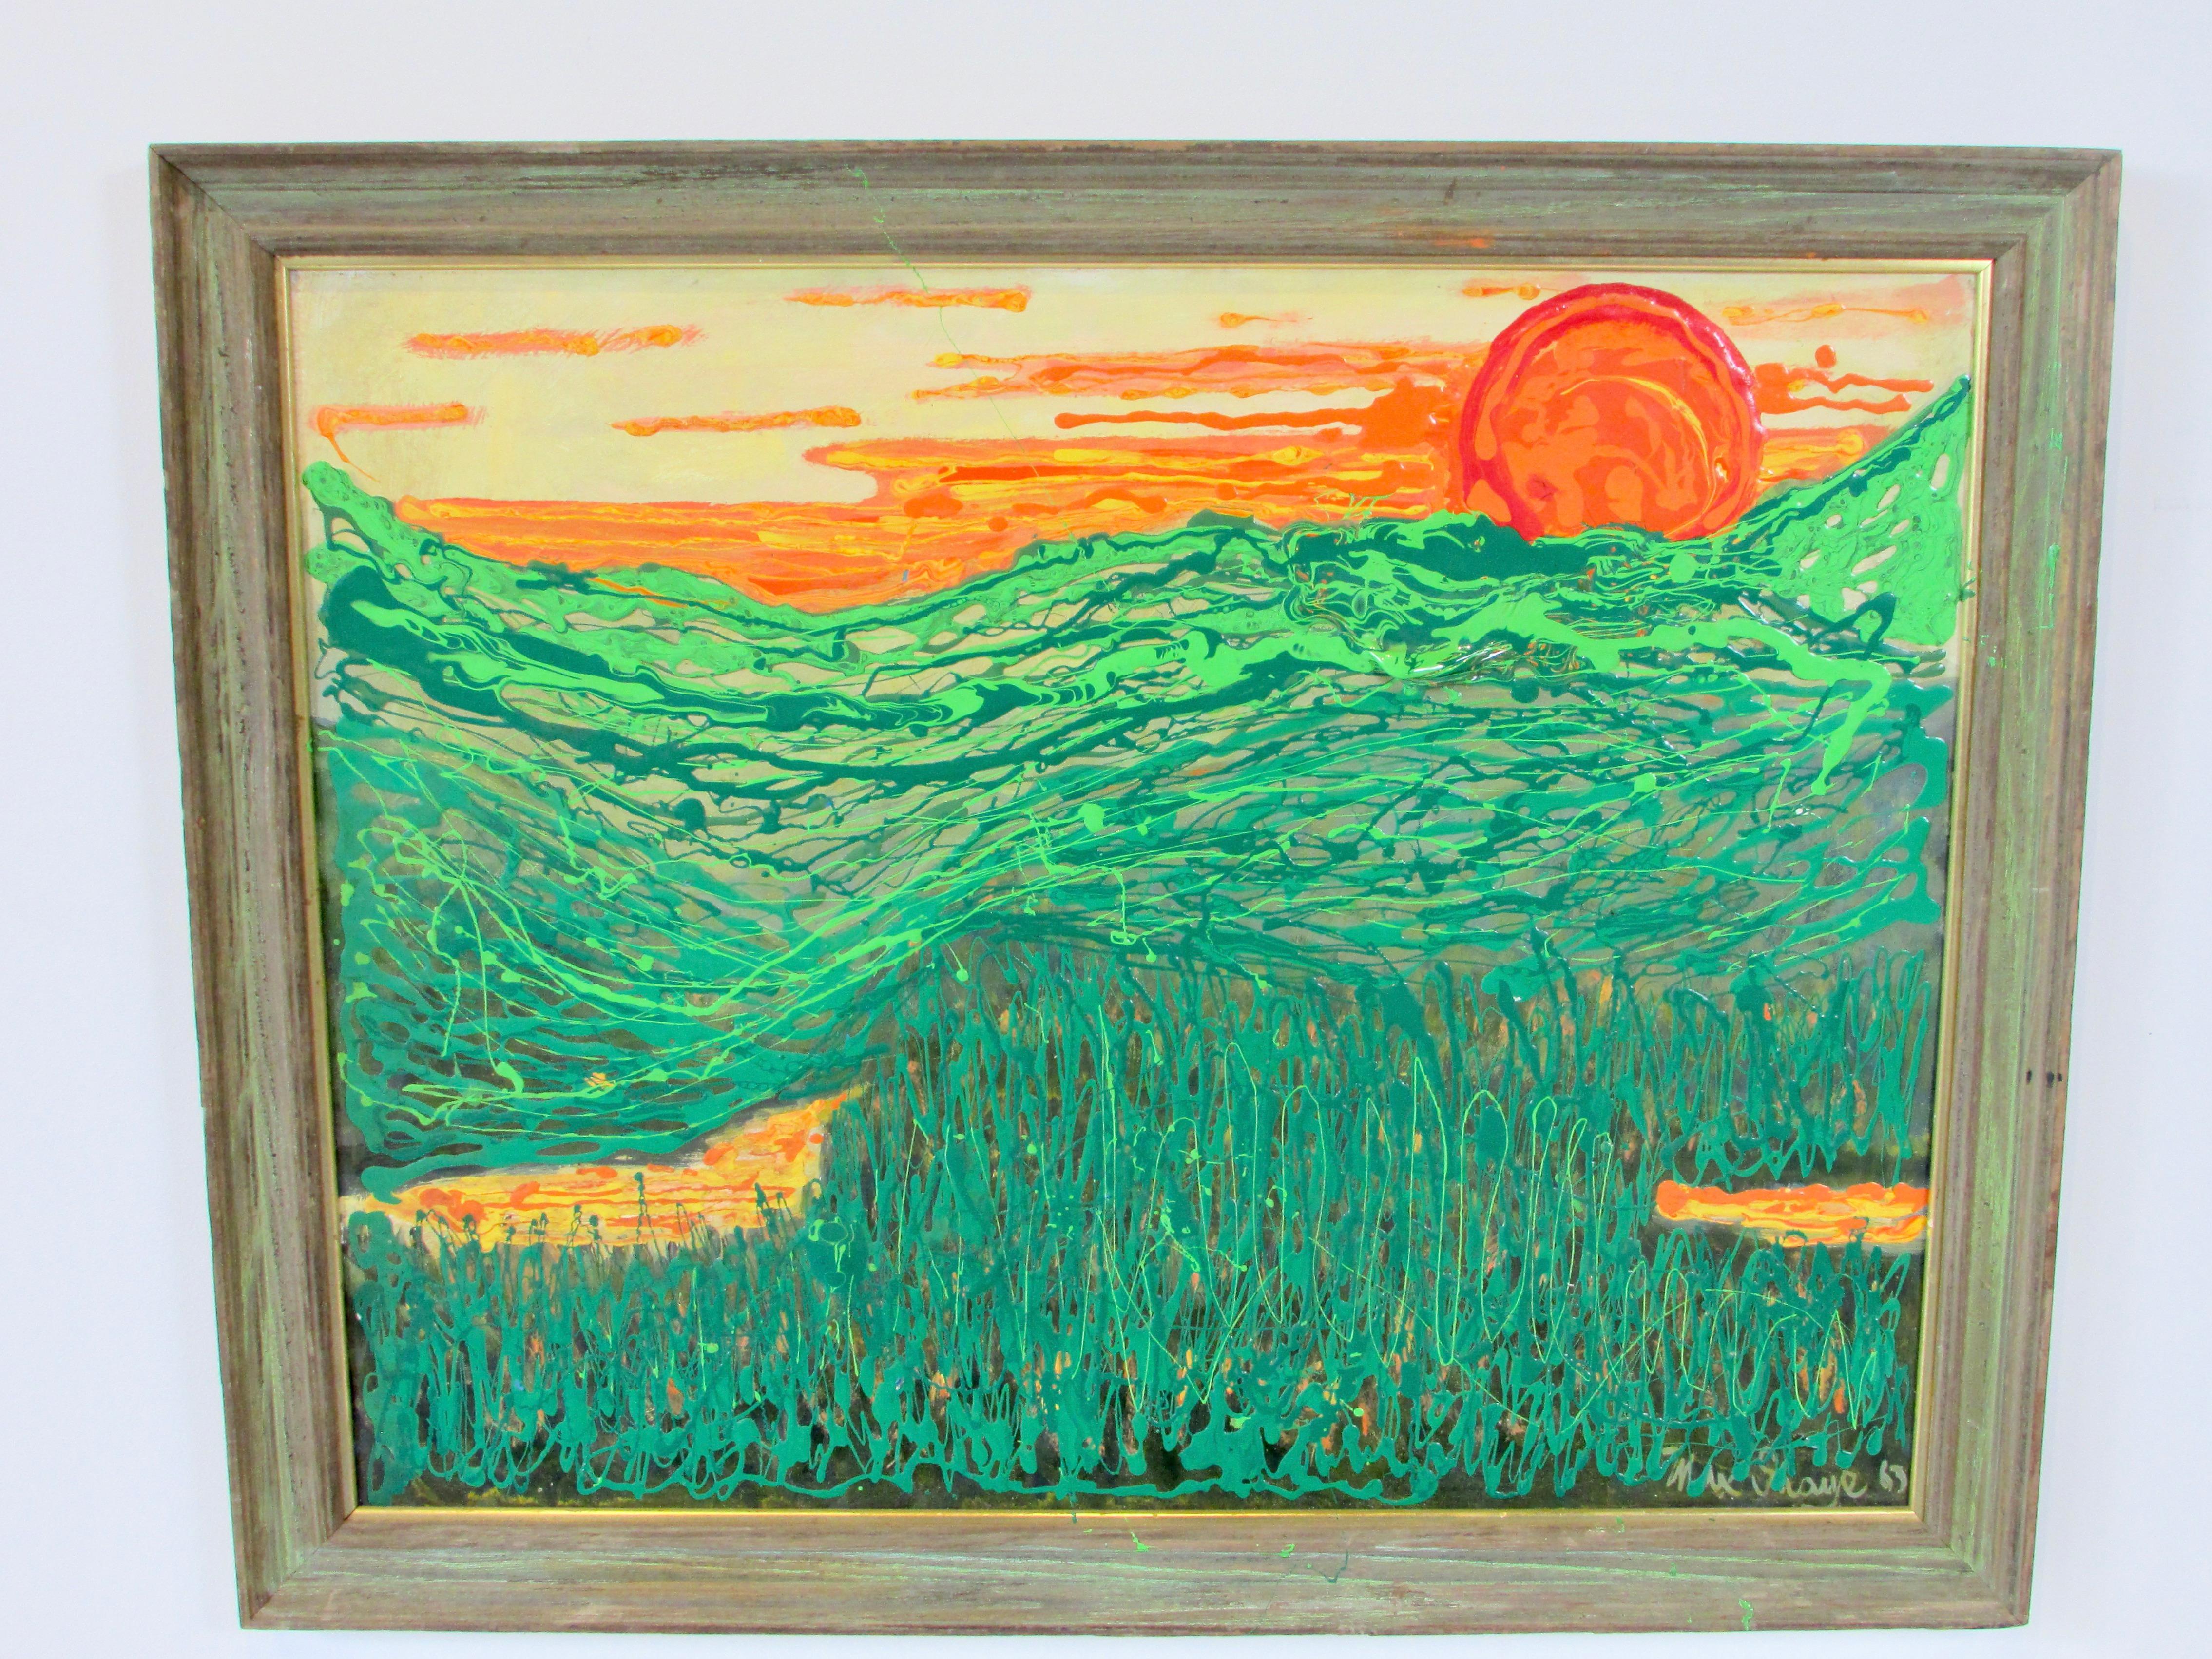 Post-Modern Max Shaye Textured Acrylic on board painting Orange Sun Over Green Valley For Sale